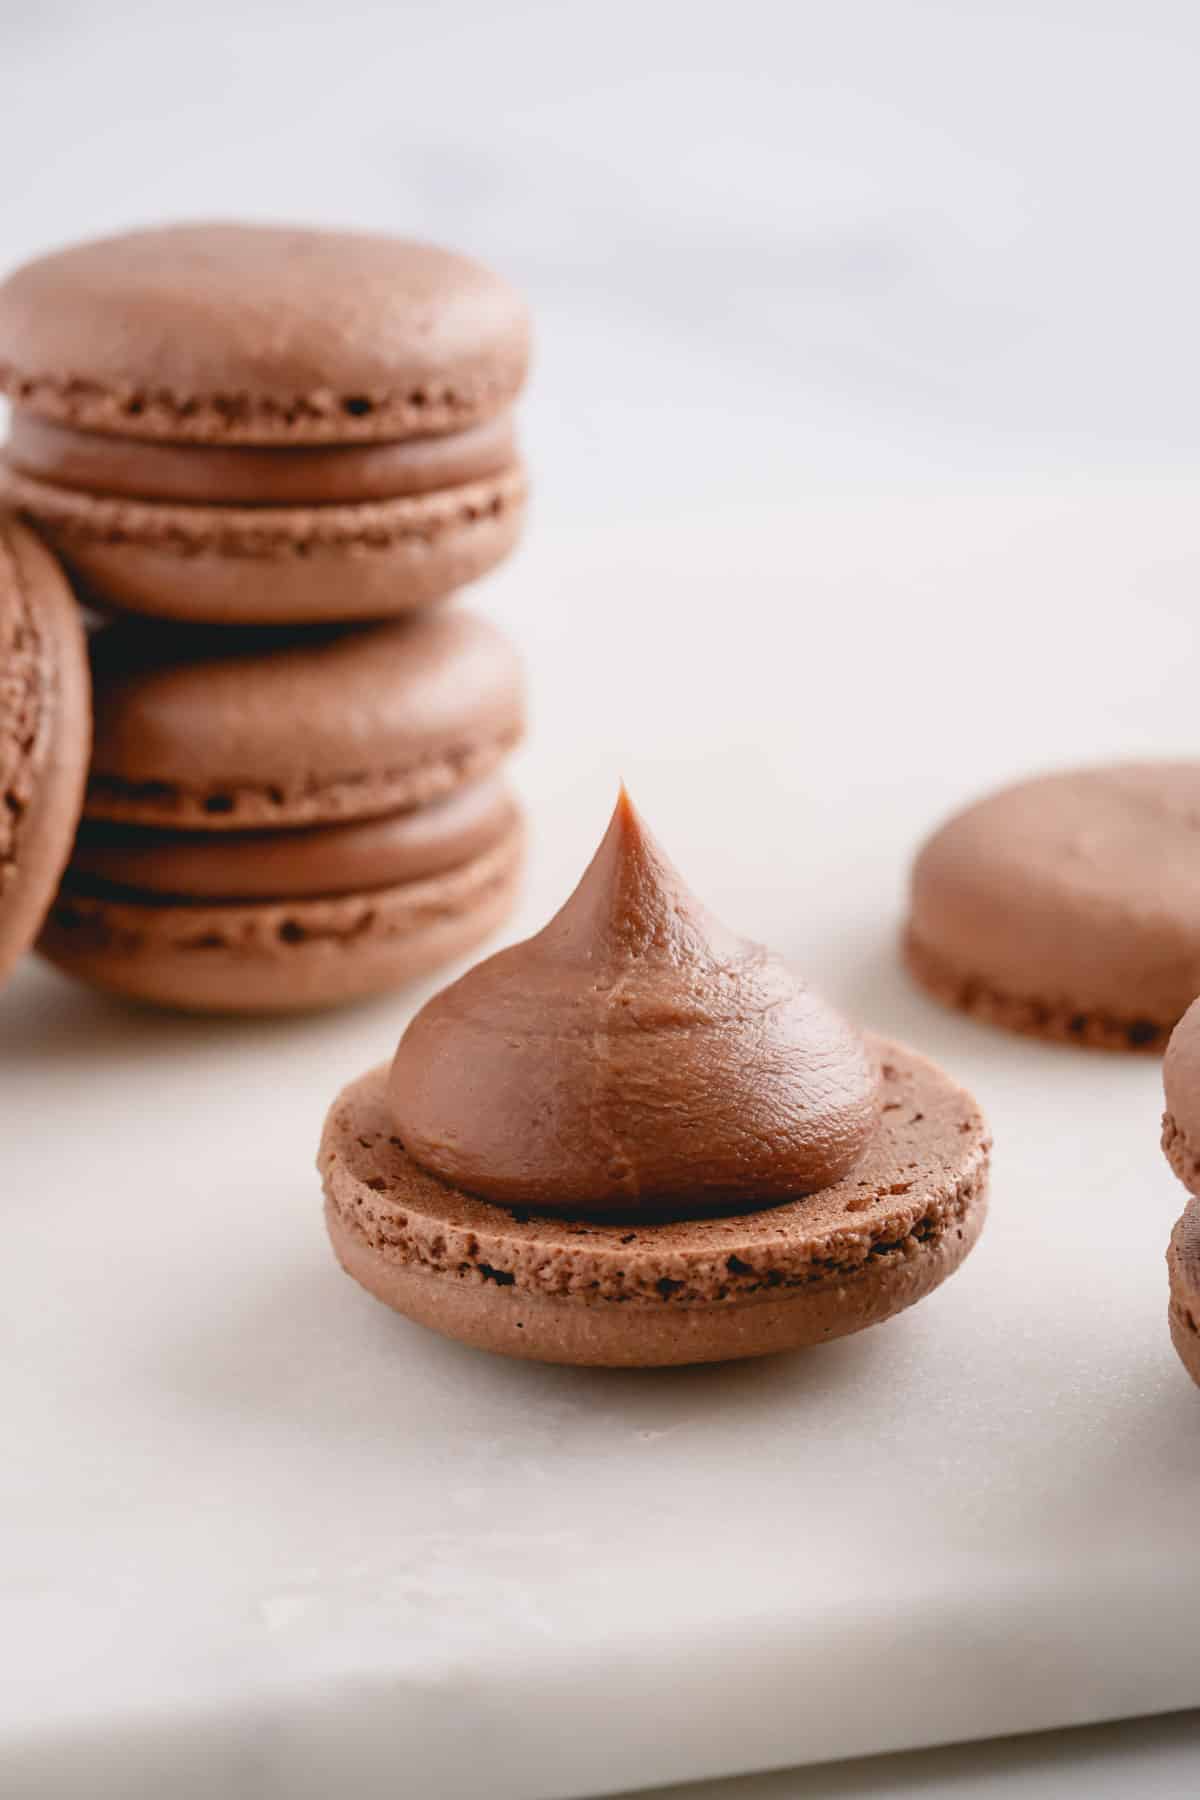 A chocolate macaron shell, bottom side up, with a dollop of chocolate filling.